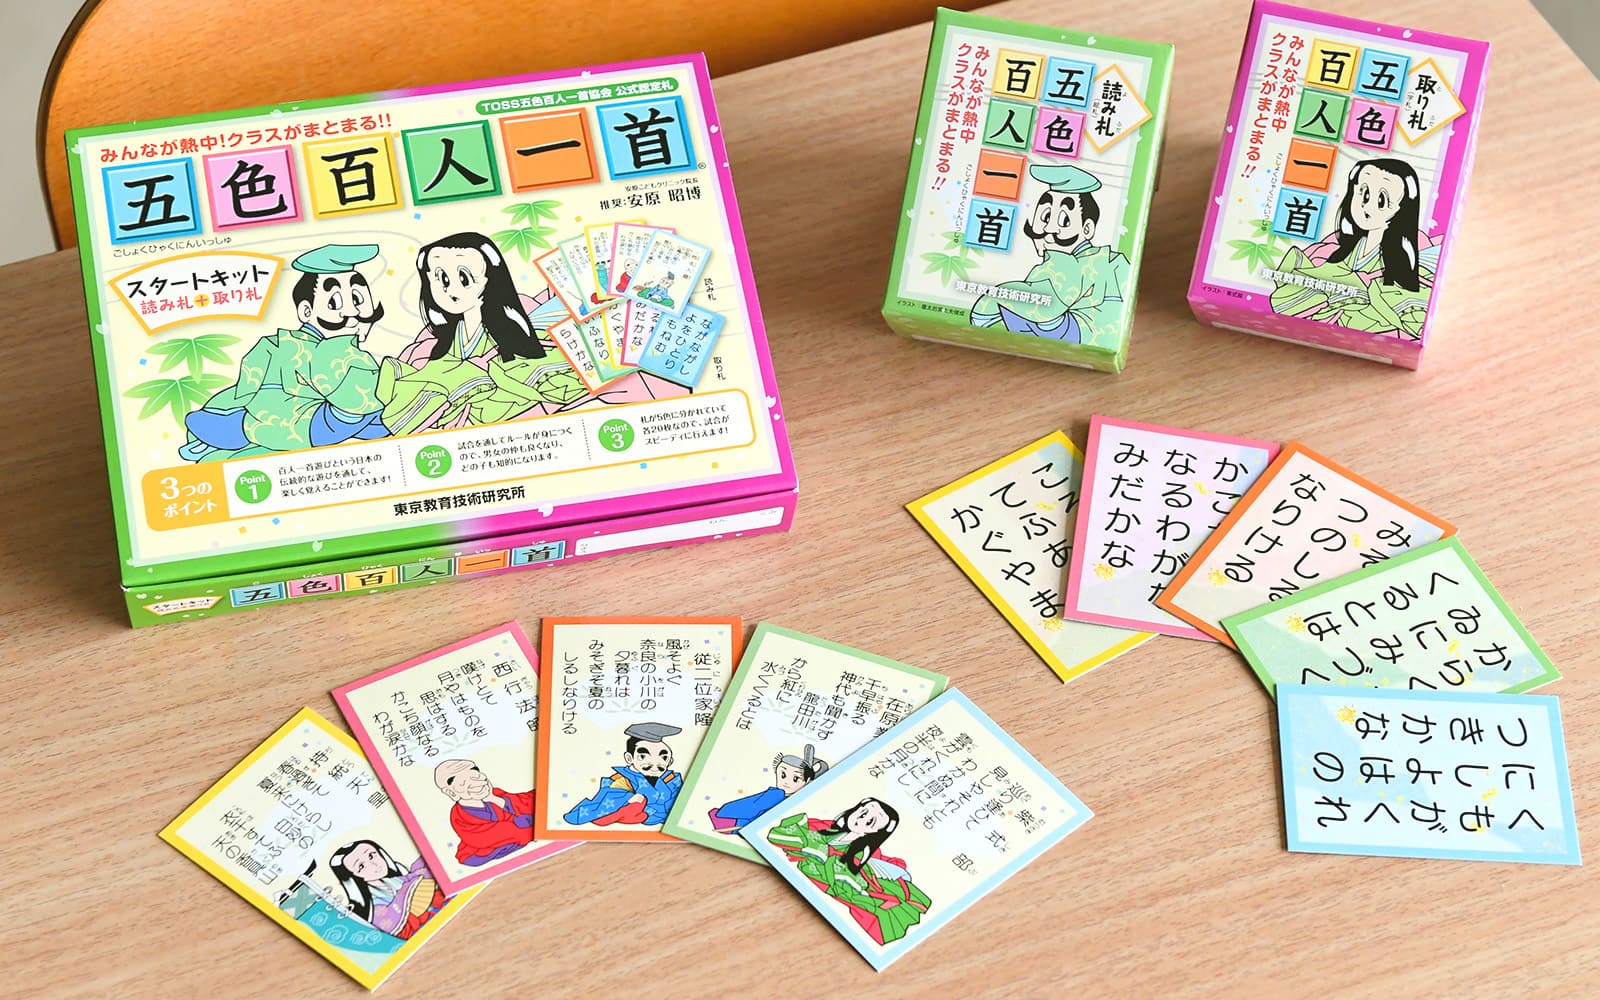 Over 3 million children and more than 300,000 teachers have enjoyed this educational material since its release.(”Goshoku Hyakunin Isshu” 2023)